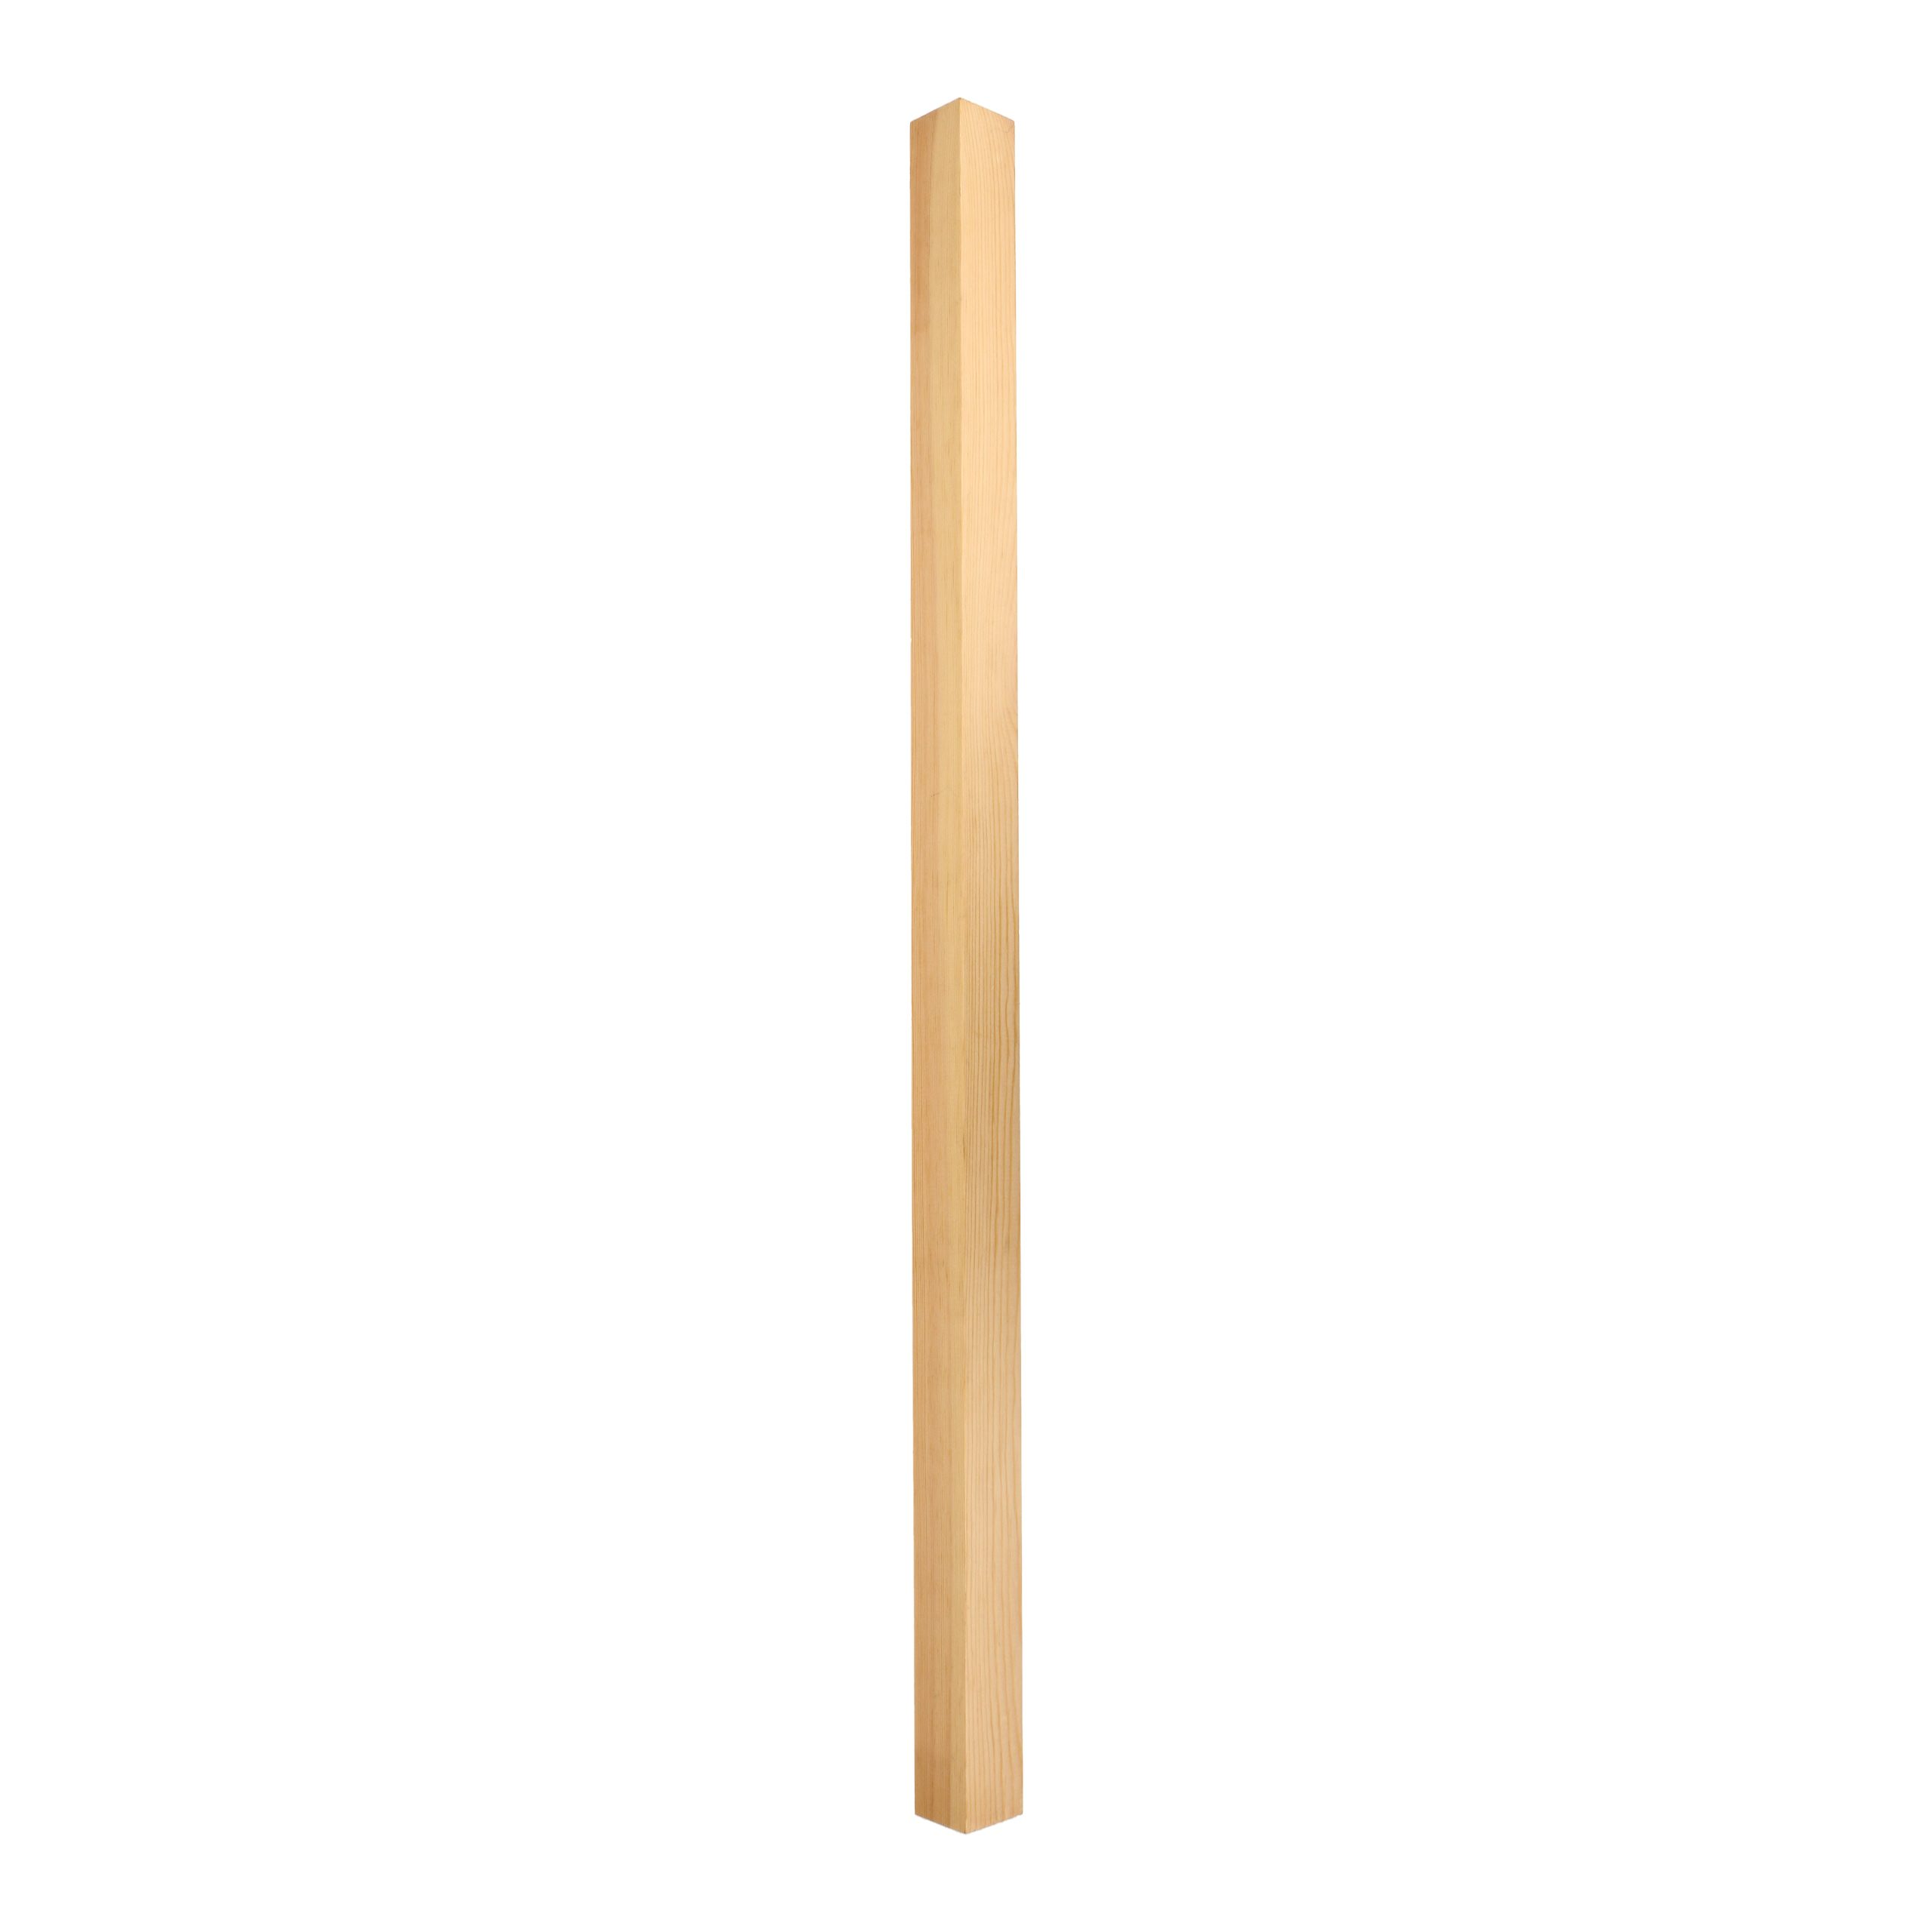 Pine-Square-41mm x 900 - Wooden staircase spindle.